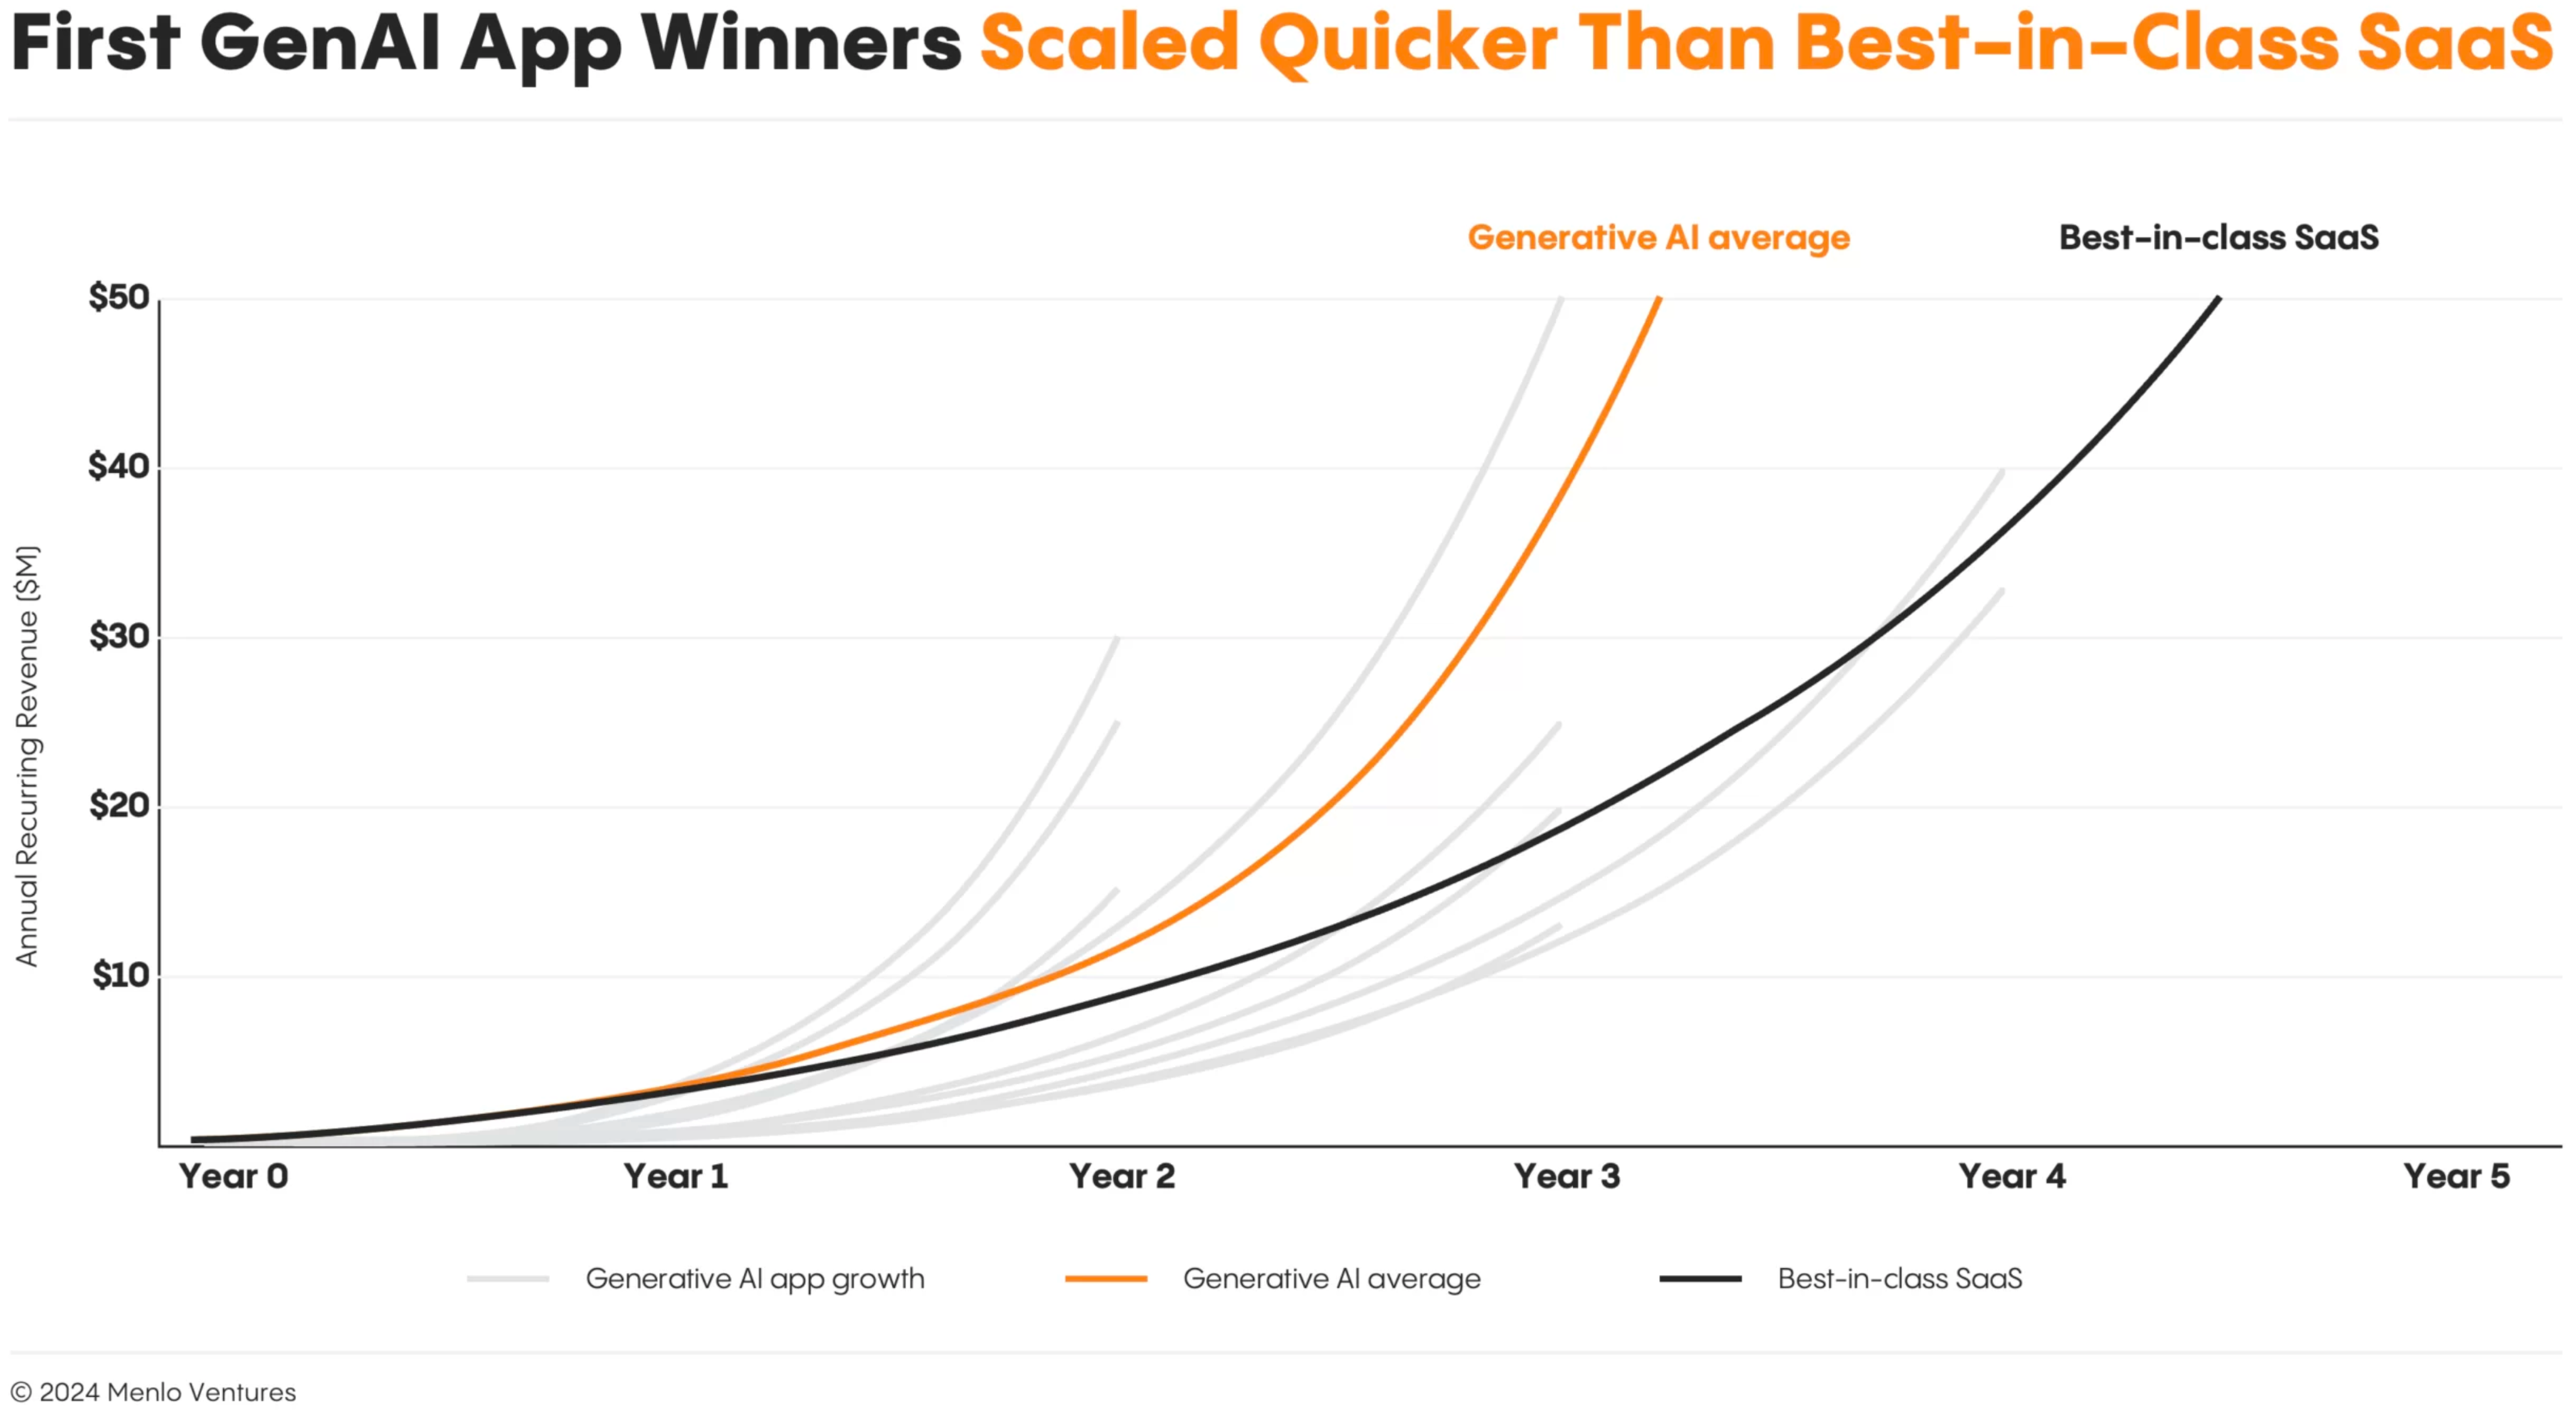 In venture, software companies are often benchmarked against a best-in-class growth trajectory described as “triple, triple, double, double, double” after hitting $1 million ARR. But in the new era of generative AI, this benchmark falls short, only describing the lowest-quartile performance of breakouts from the generative AI wave.